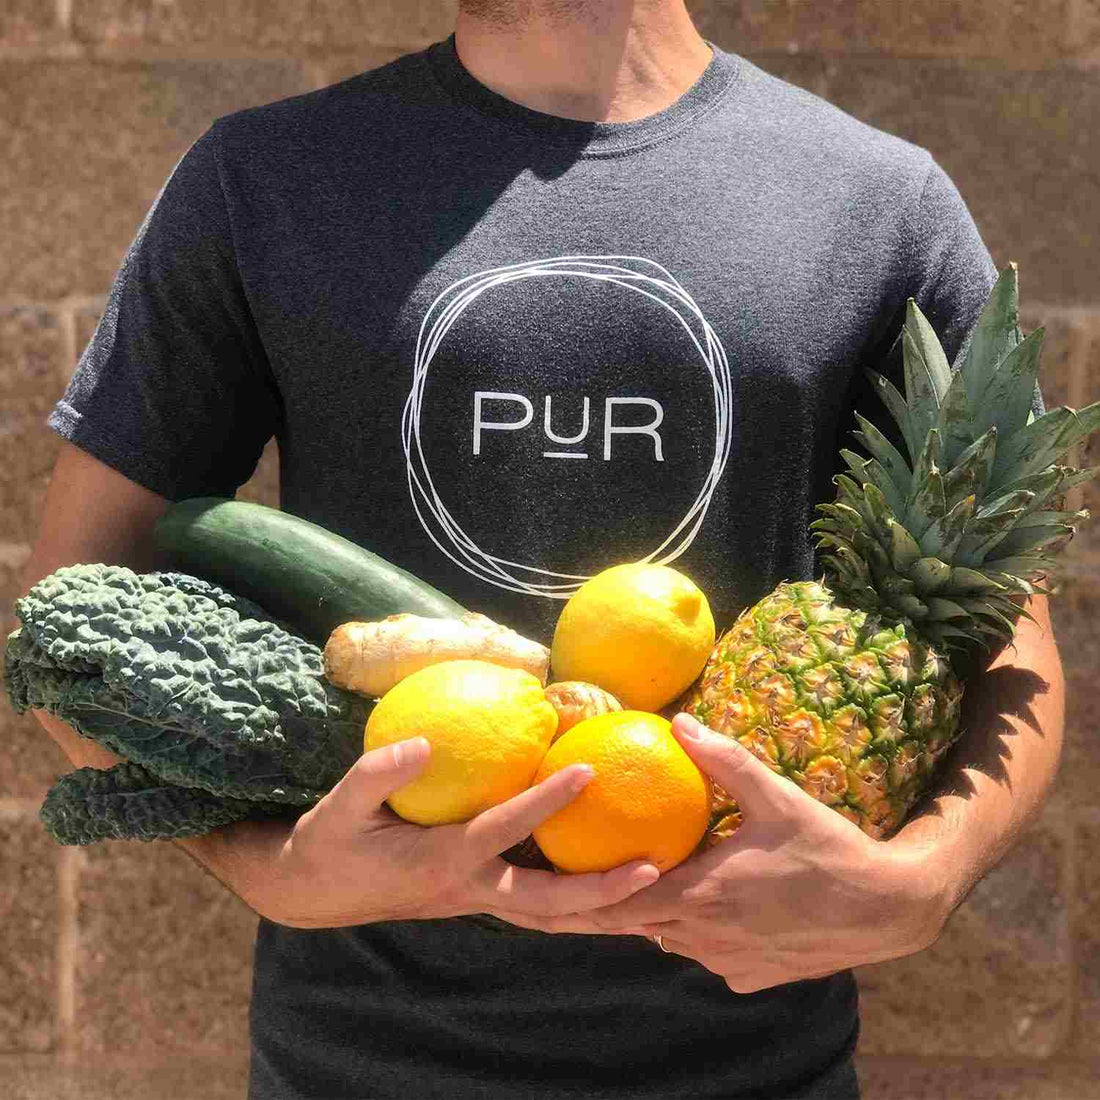 How To Meet Nutritional Needs On A Vegan Diet - PUR Cold Pressed Juice